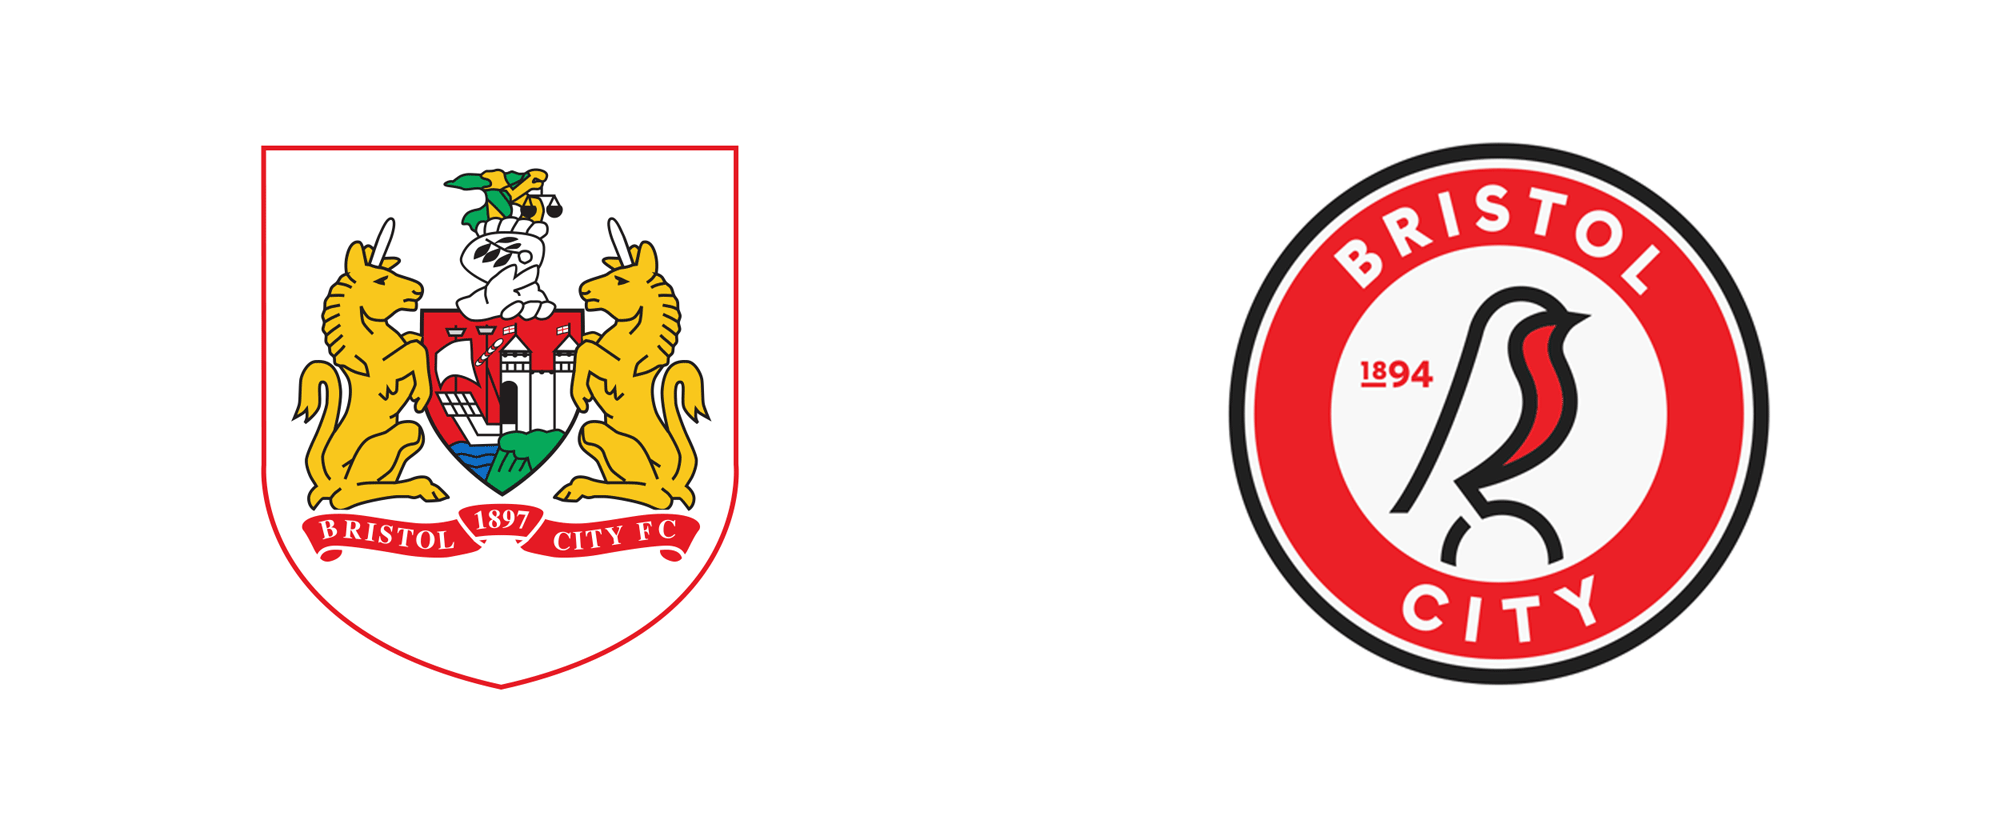 Brand New New Logo And Identity For Bristol City Fc By Mr B Friends